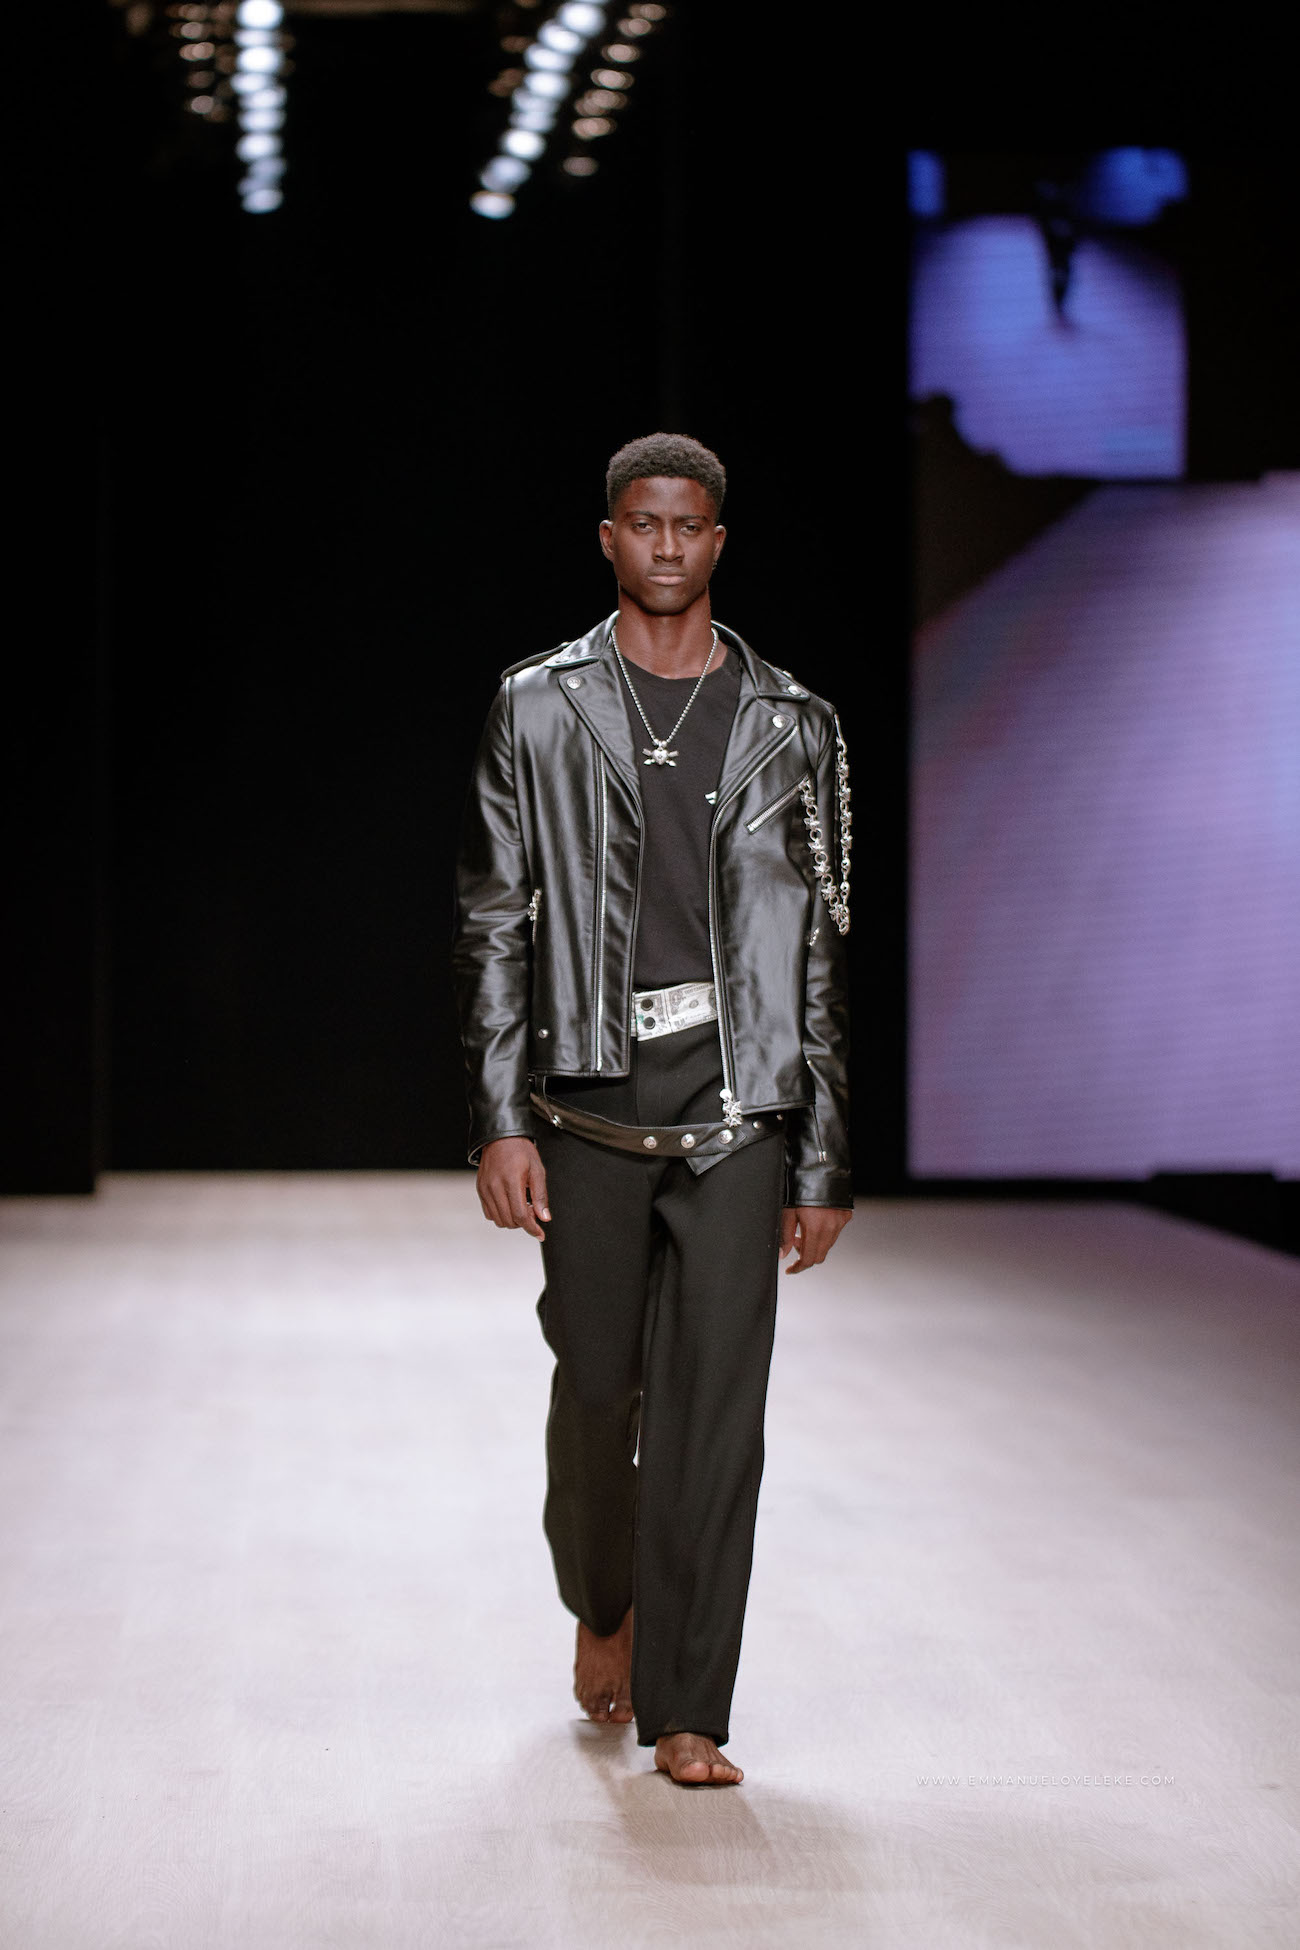 SPOTTED: Central Cee Taps in with Ice Spice at NYFW Wearing Chrome